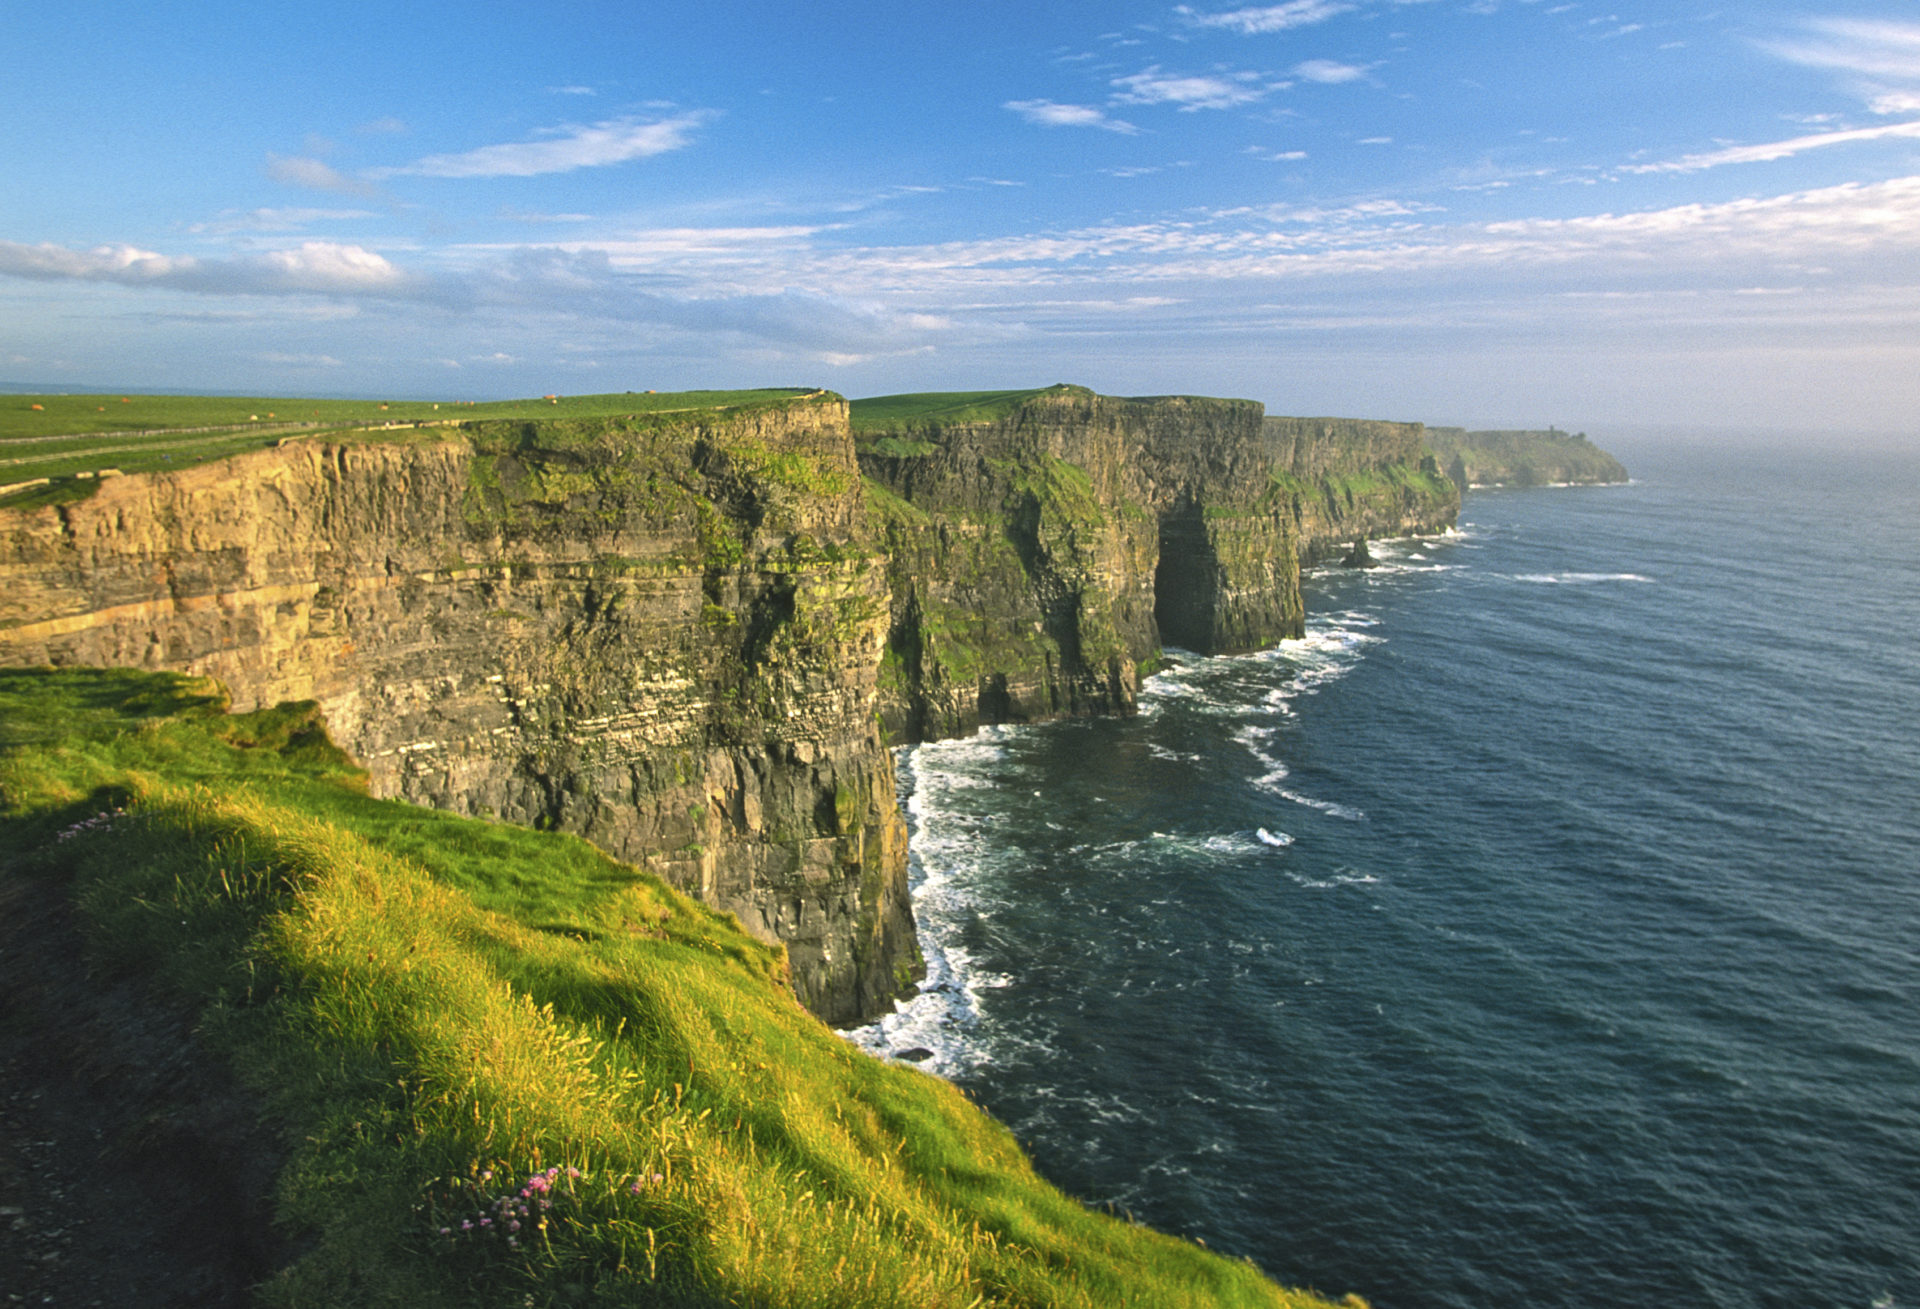 places to visit north ireland